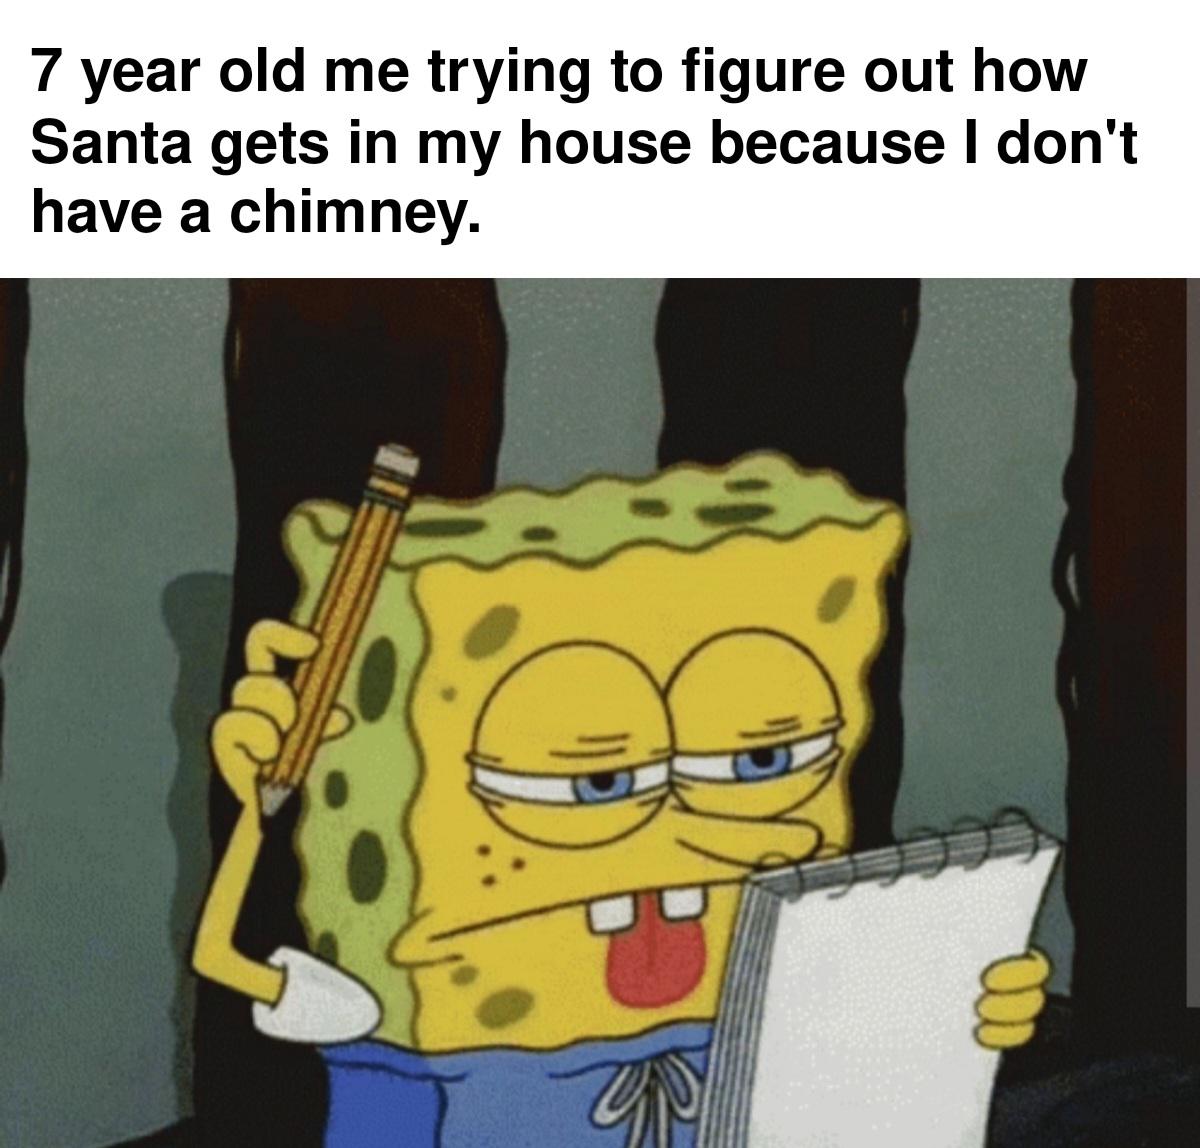 funny memes - cartoon - 7 year old me trying to figure out how Santa gets in my house because I don't have a chimney. w